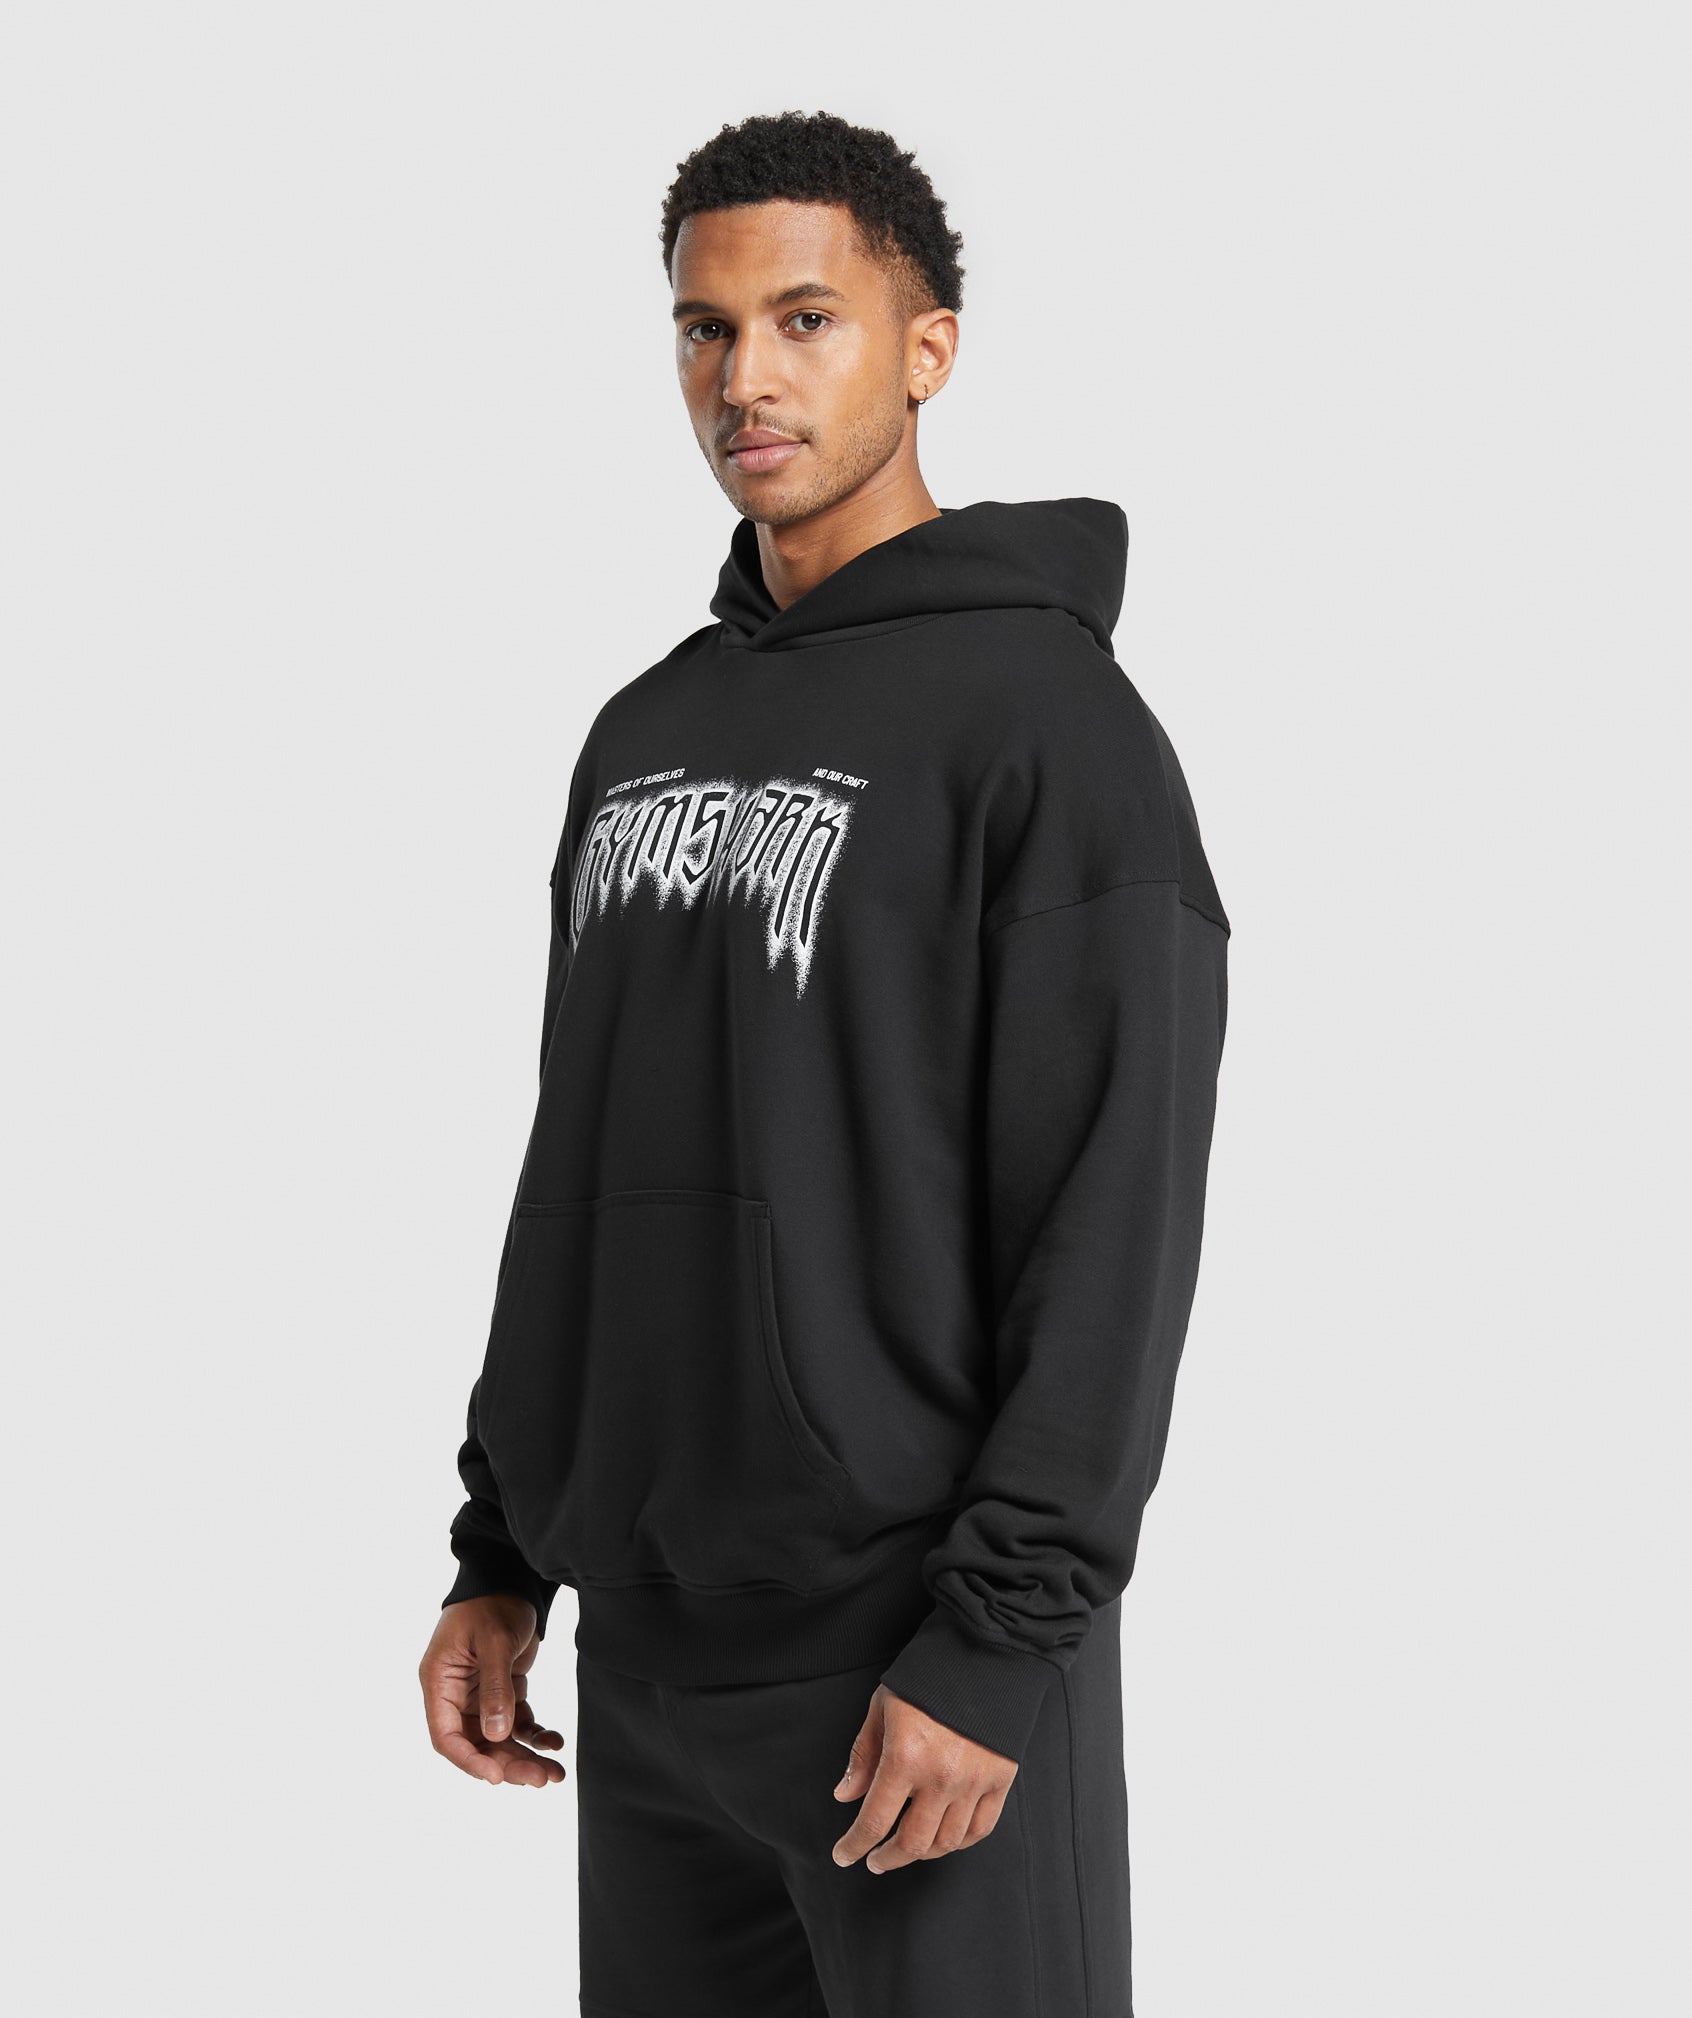 Masters of Our Craft Hoodie in Black - view 3